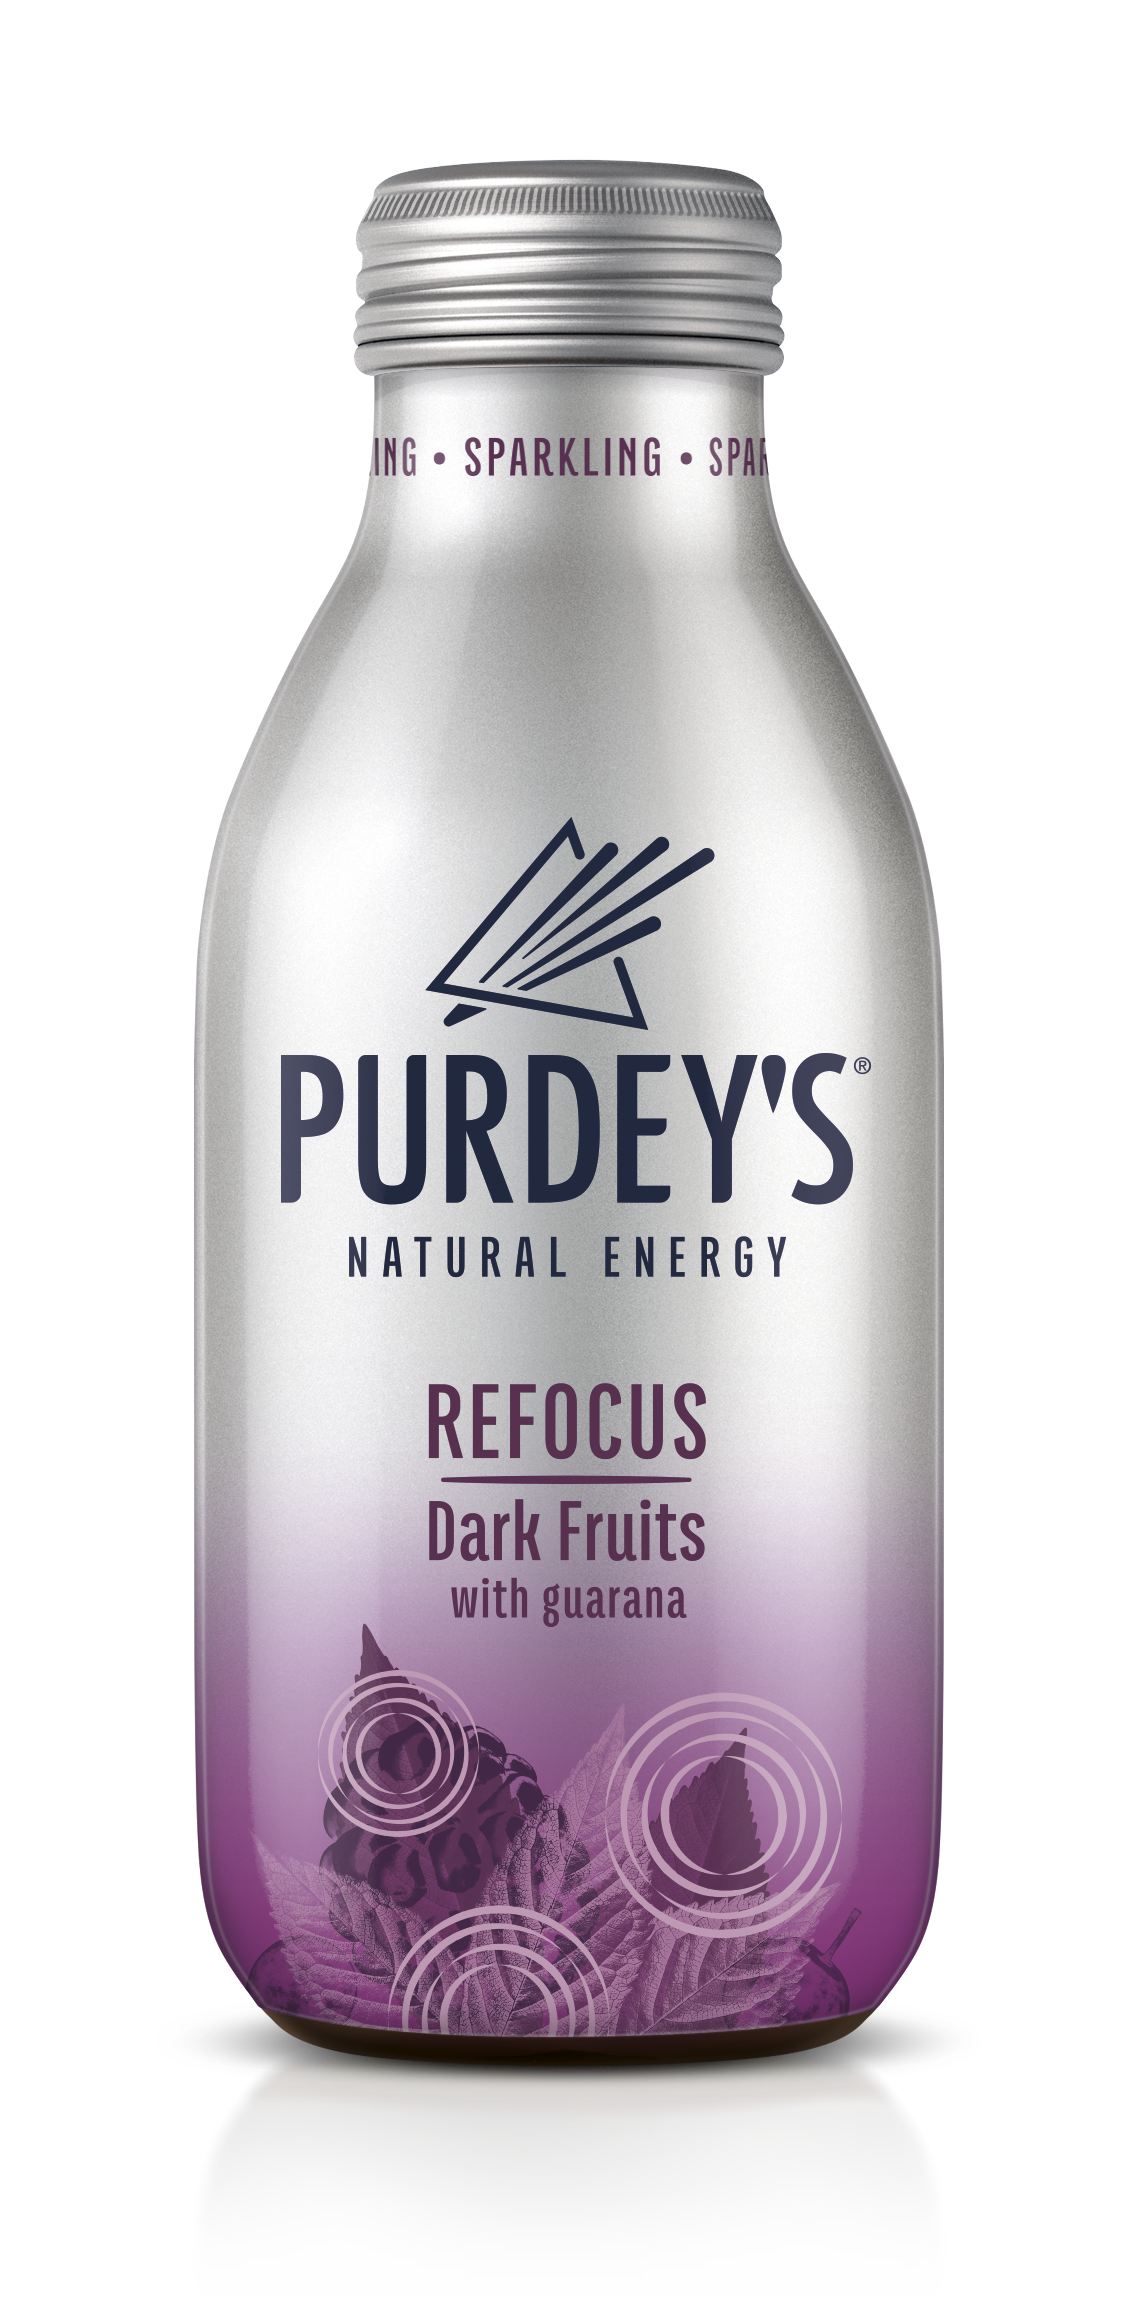 Purdey’s launches two flavours with wellness in mind